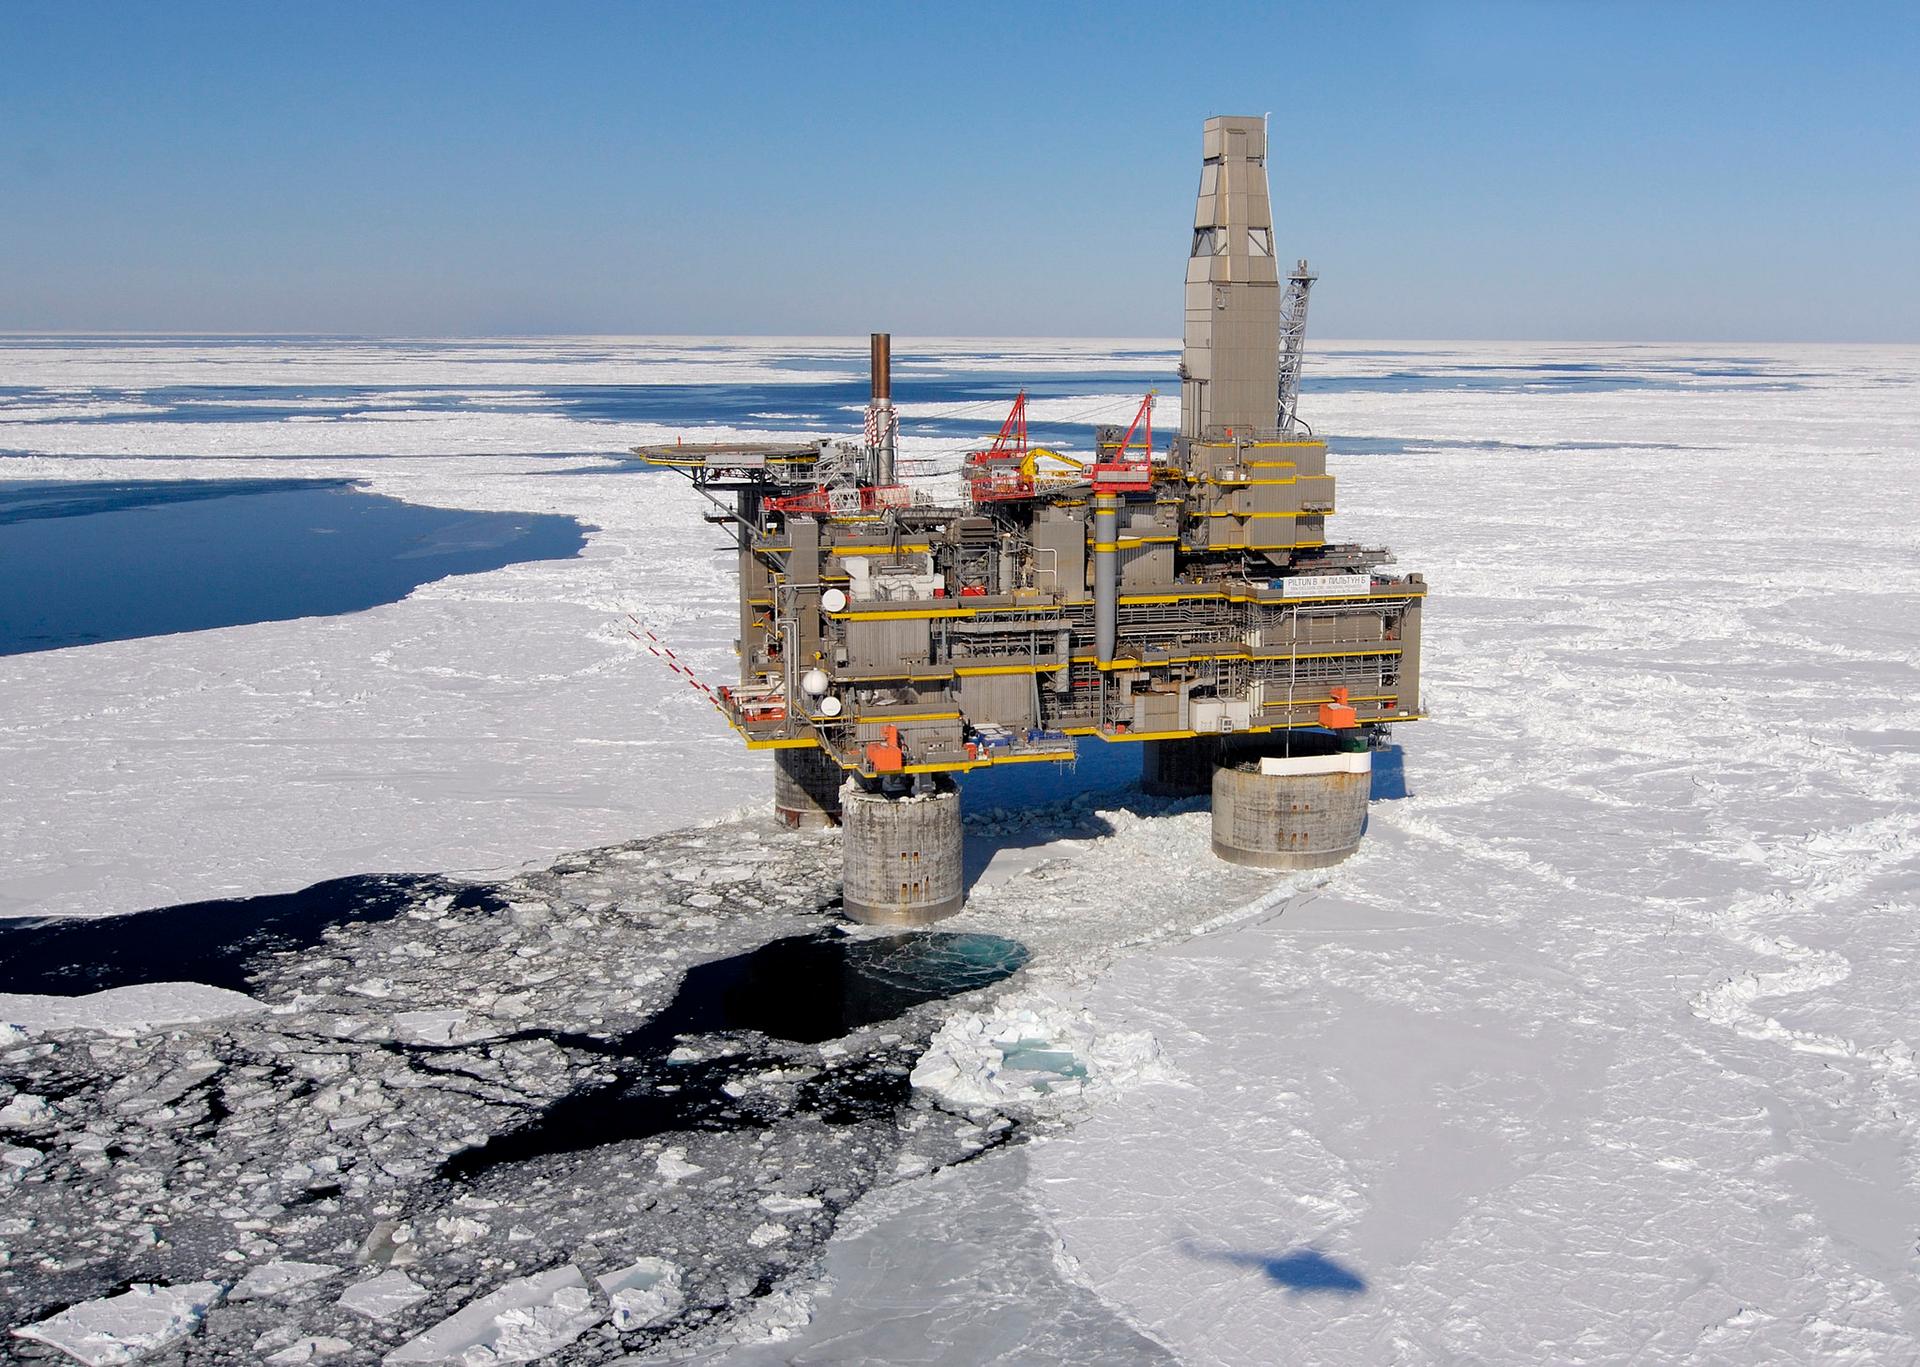 An oil and gas project near Sakhalin Island depends on foreign investment and expertise.